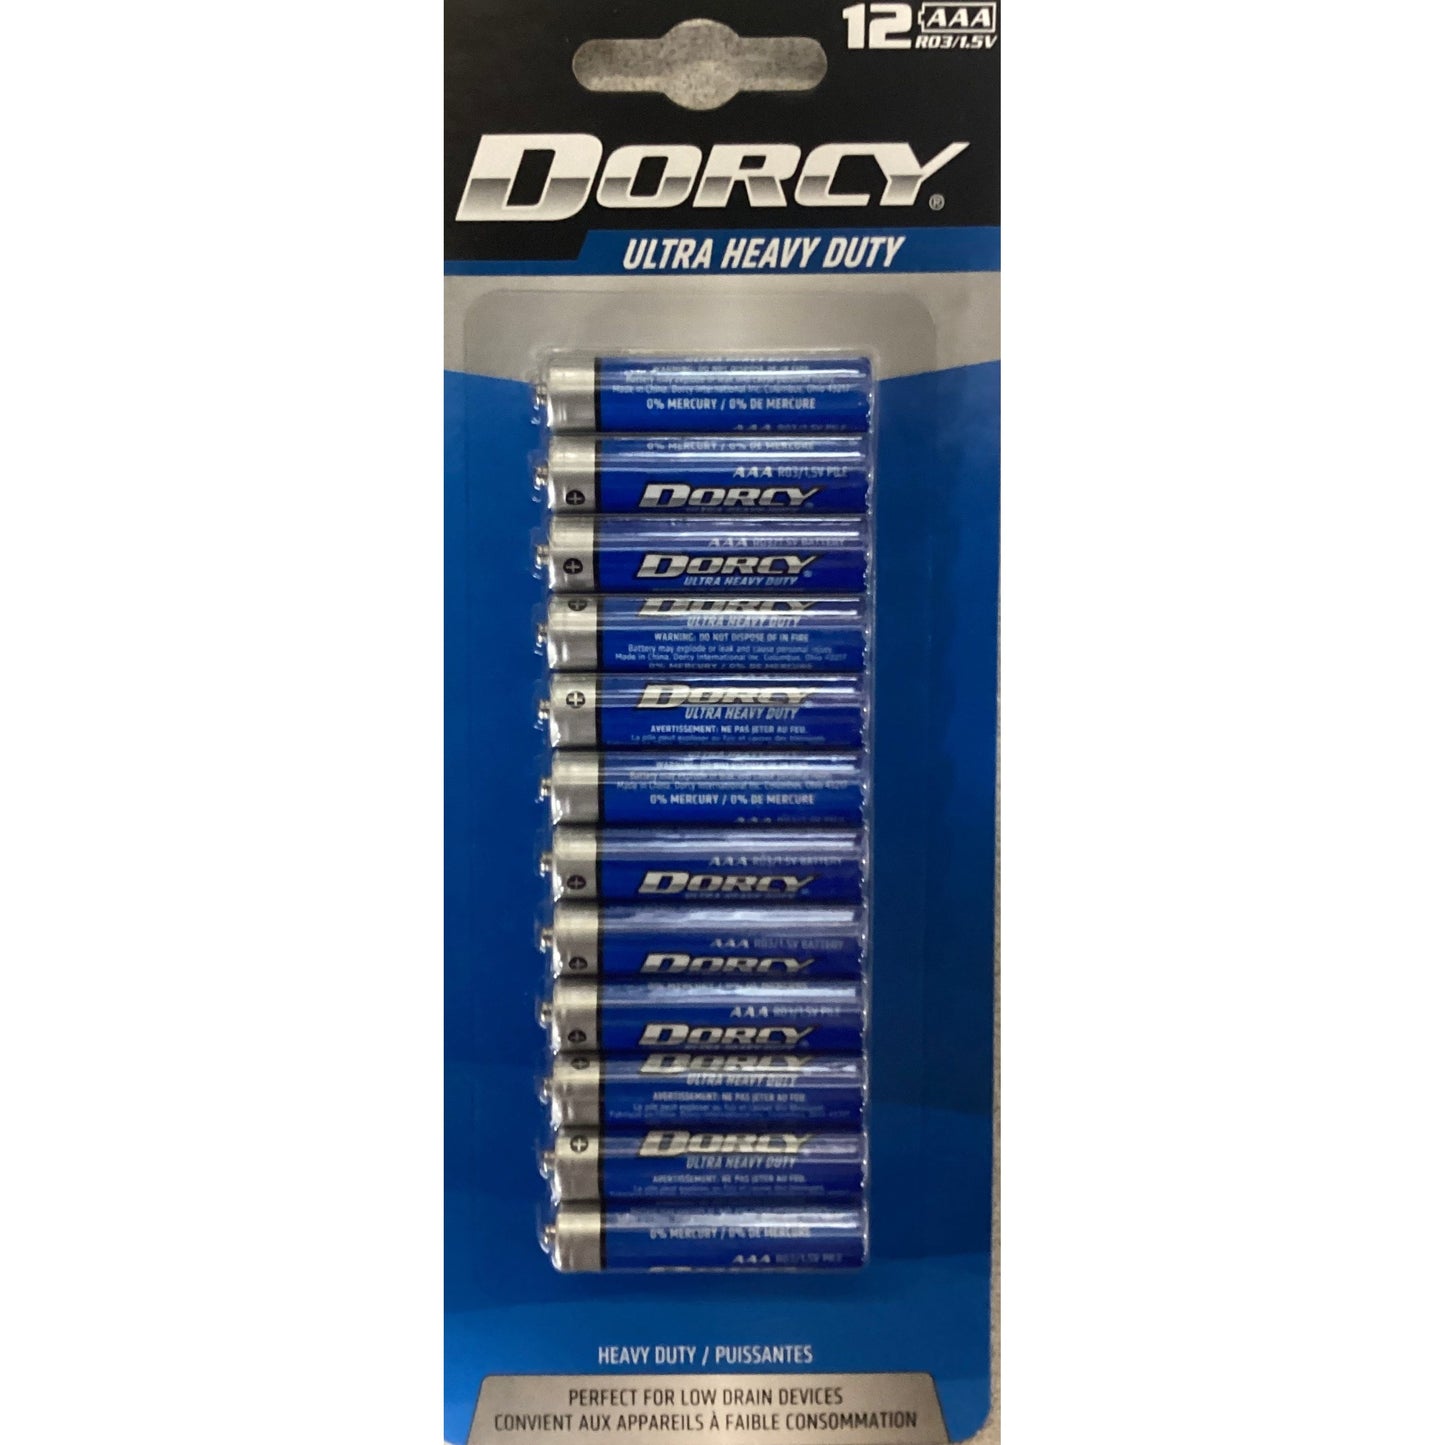 Dorey Ultra Heavy-Duty AAA Batteries 12 Pack: Reliable power source for your devices. Long-lasting and durable.